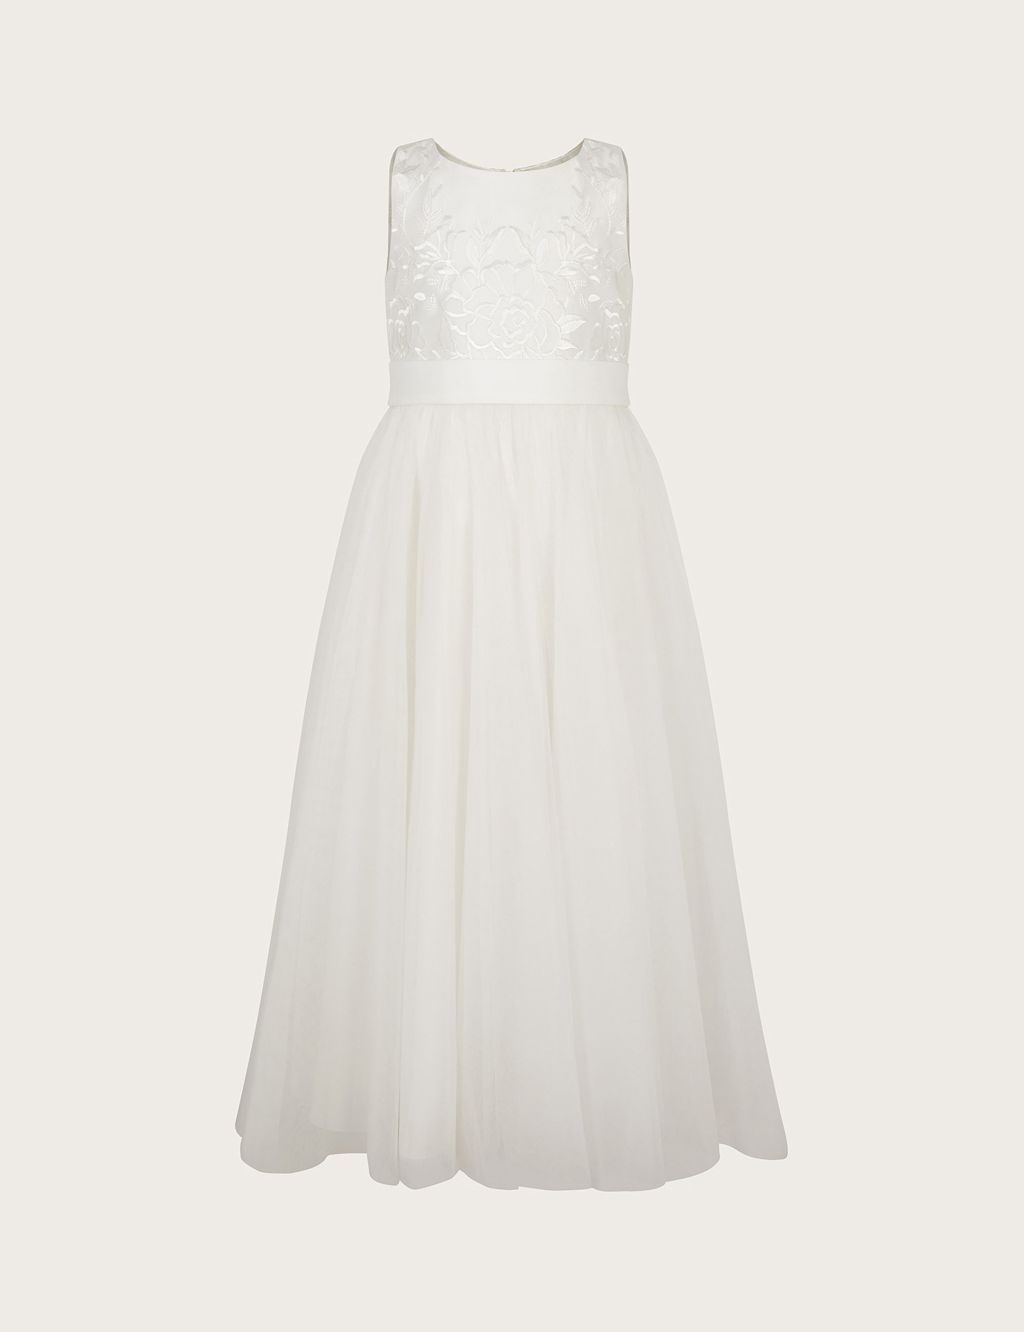 Embroidered Tulle Occasion Dress (3-13 Yrs) image 2